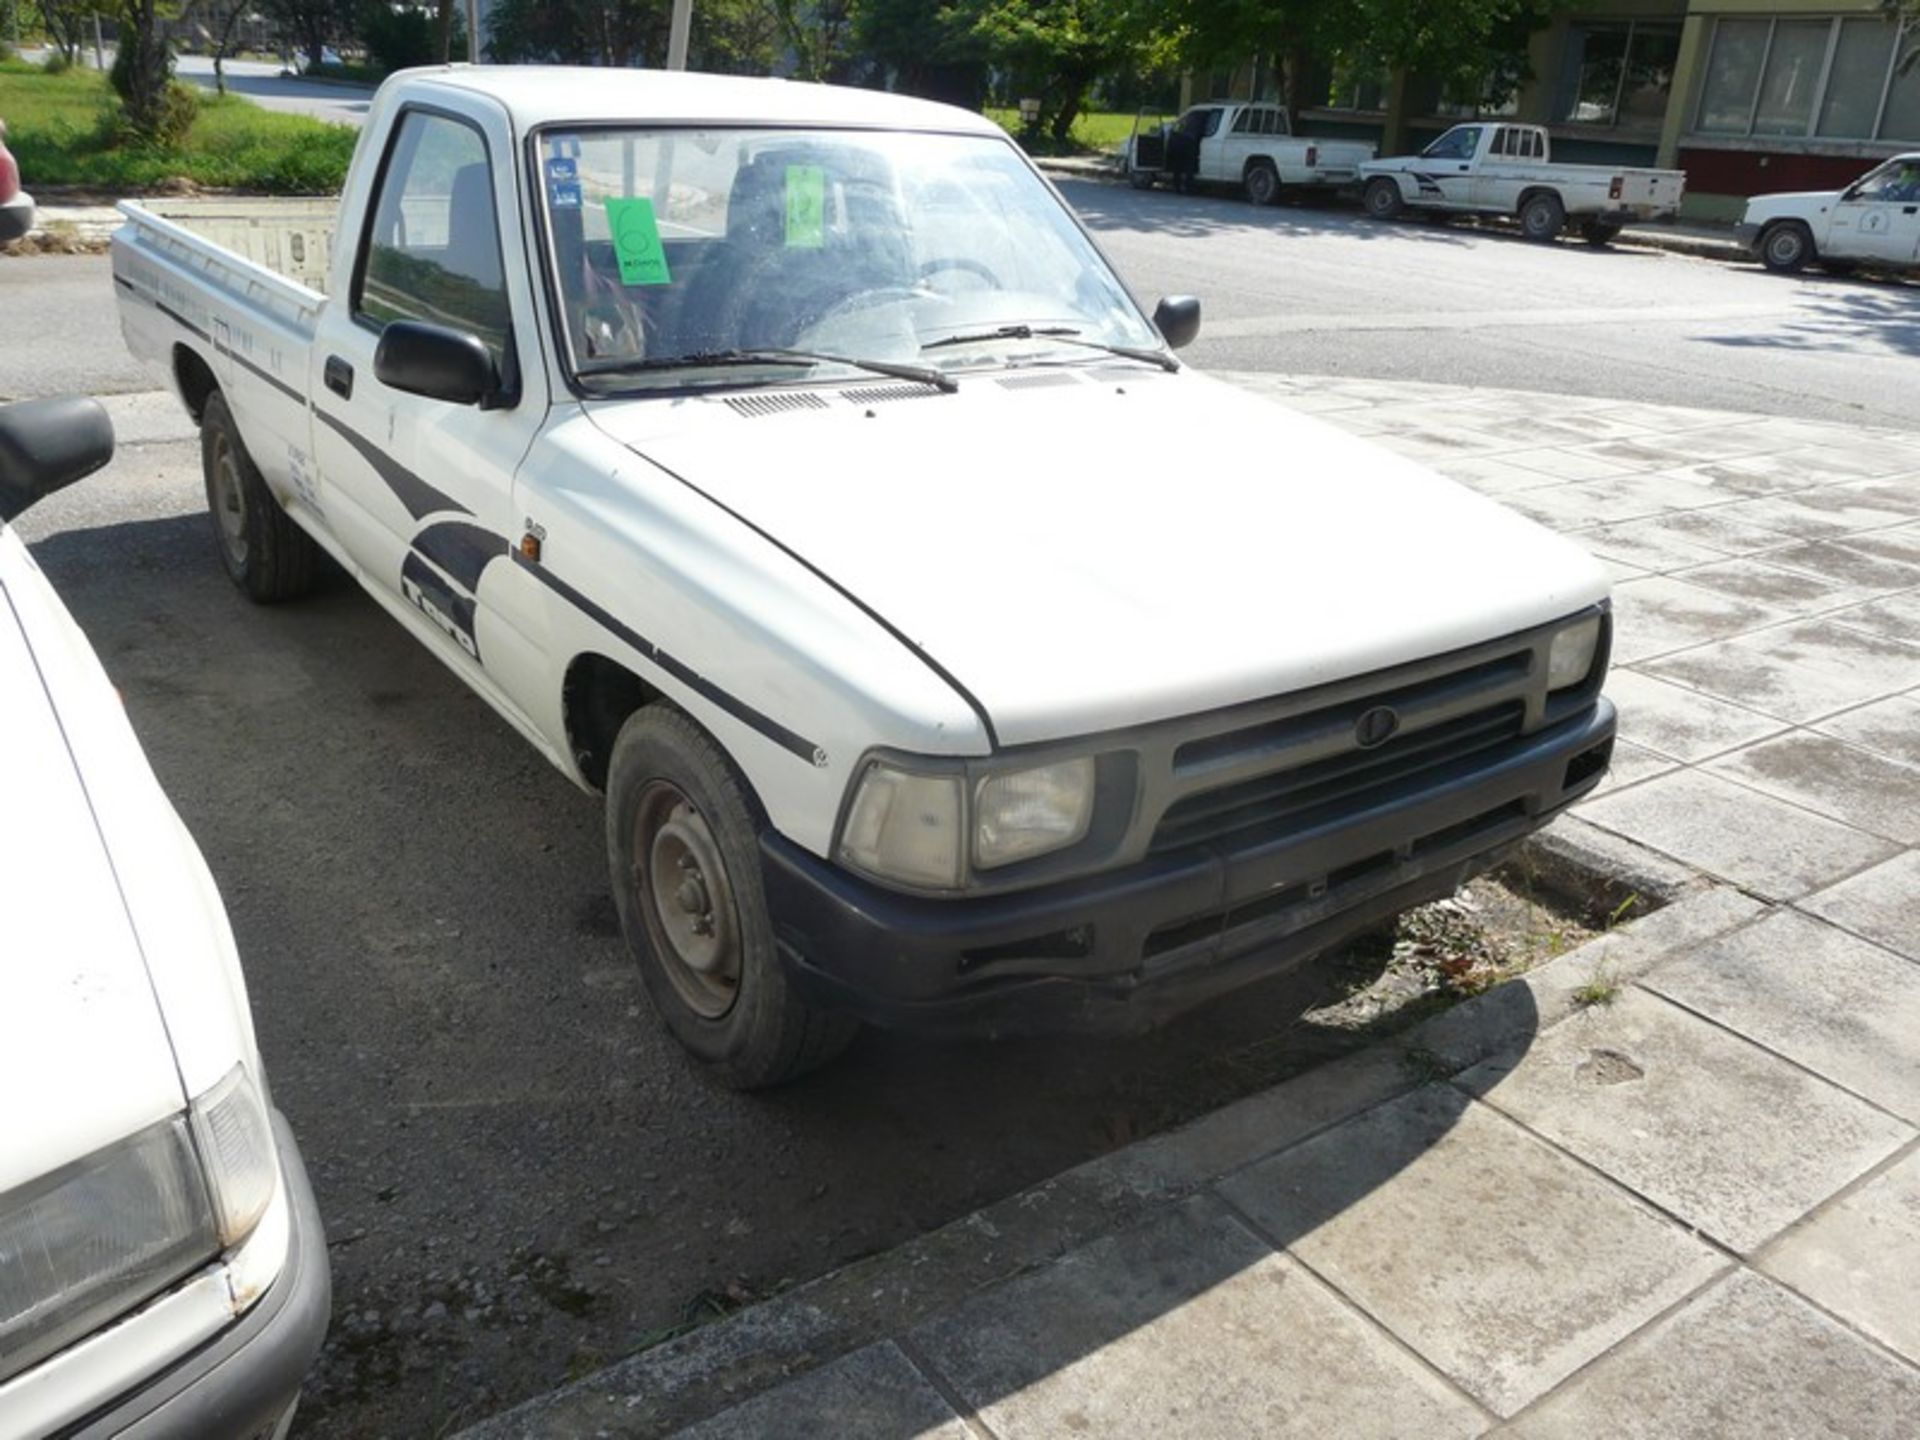 WV TARO REG NBY 4244 ,2.4 DIESEL ,KM 188583,Pick Up Truck ,2 Doors, Service Book Available , Year: - Image 4 of 15